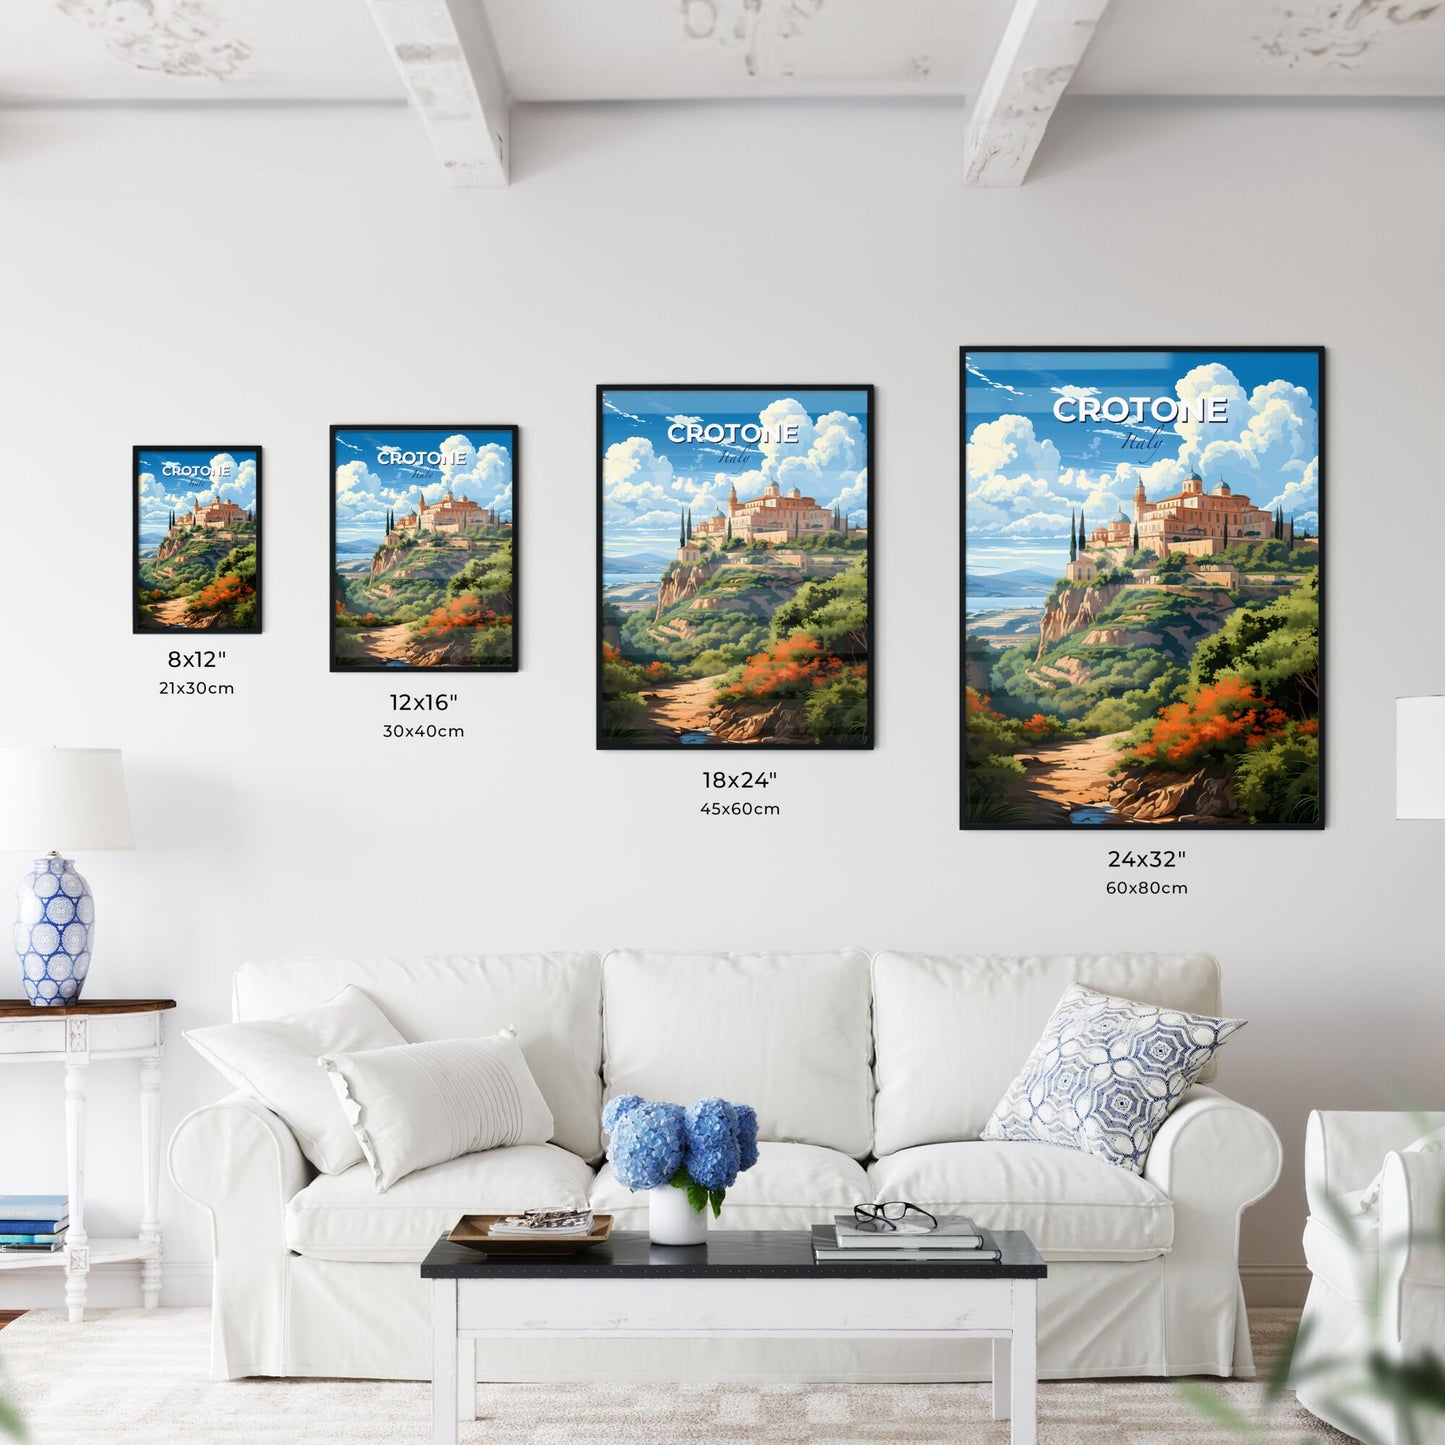 Crotone, Italy, A Poster of a painting of a castle on a hill Default Title